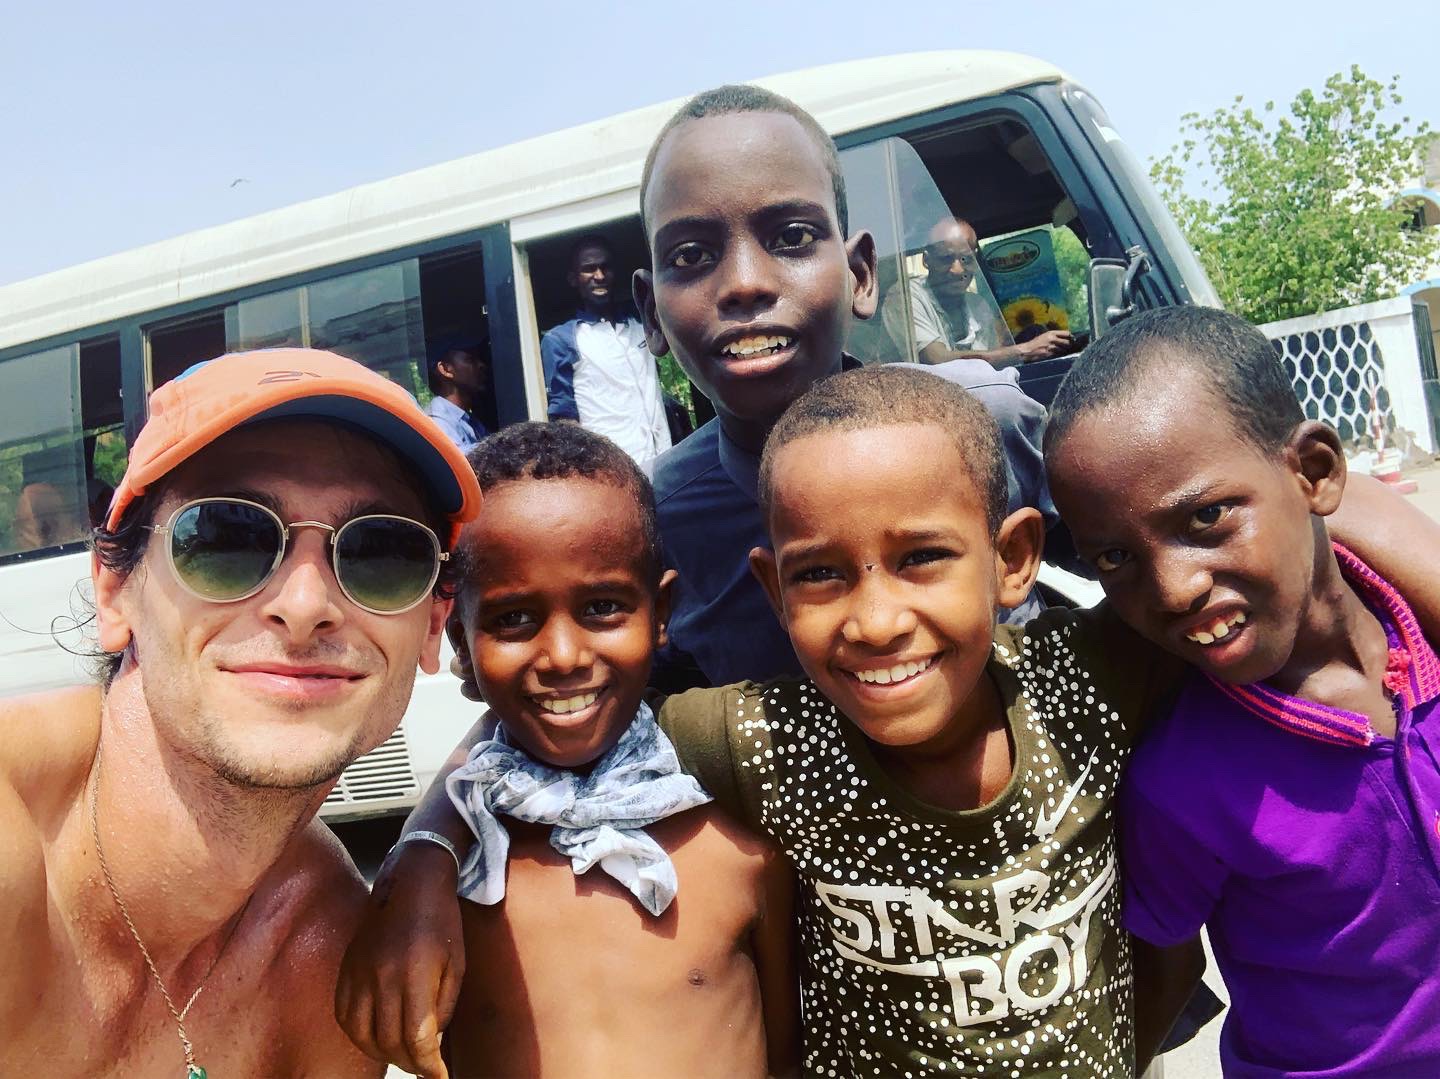 Nick Butter with local African children